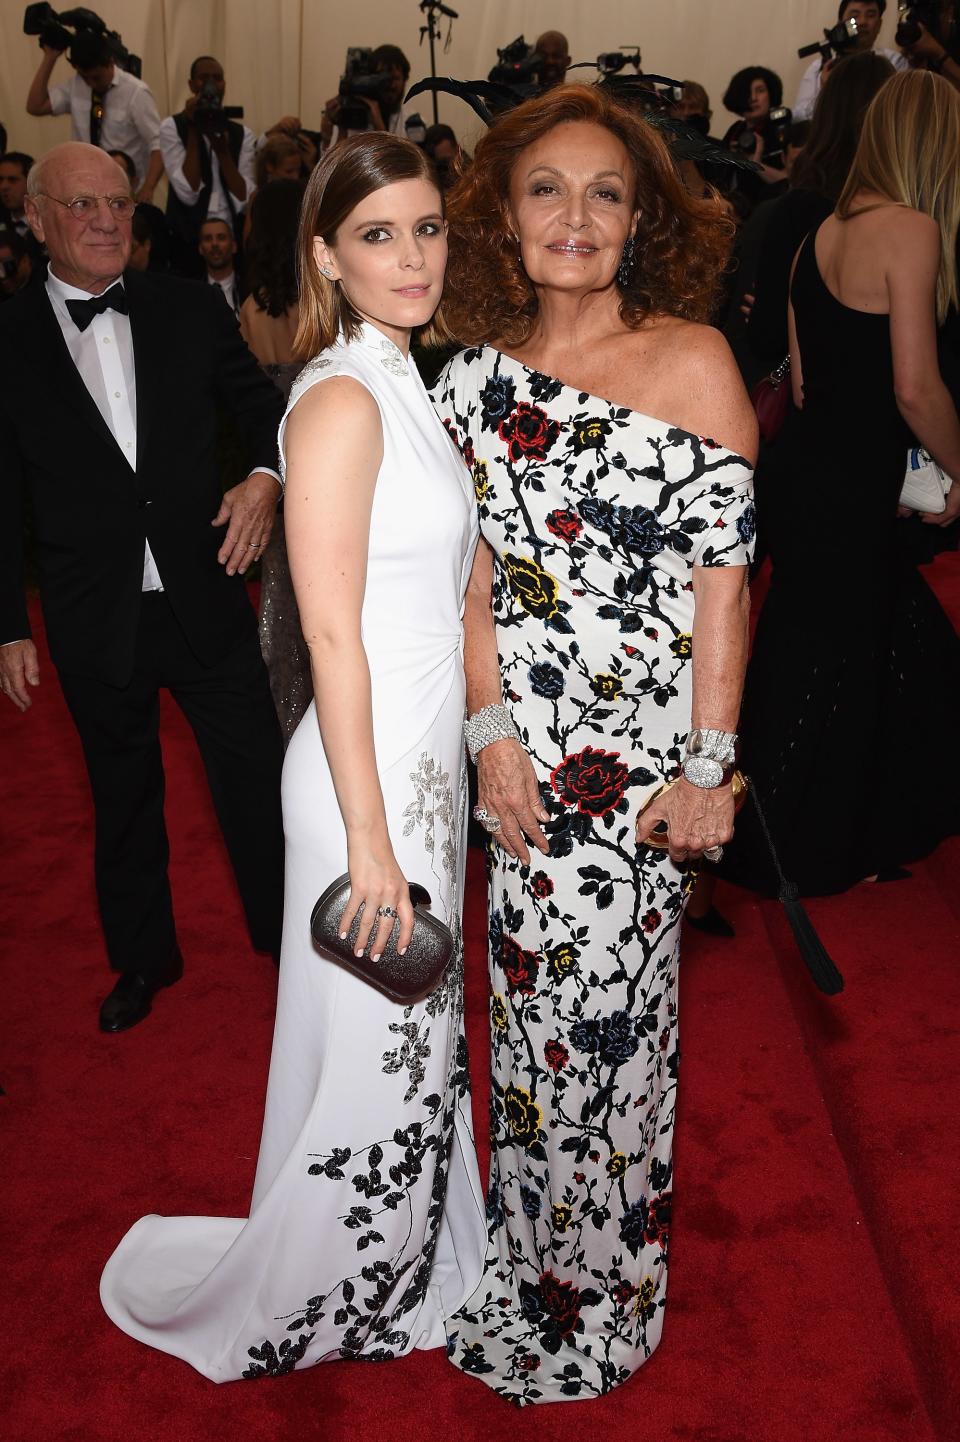 <h1 class="title">Kate Mara and Diane von Furstenberg, both in Diane von Furstenberg</h1><cite class="credit">Photo: Getty Images</cite>